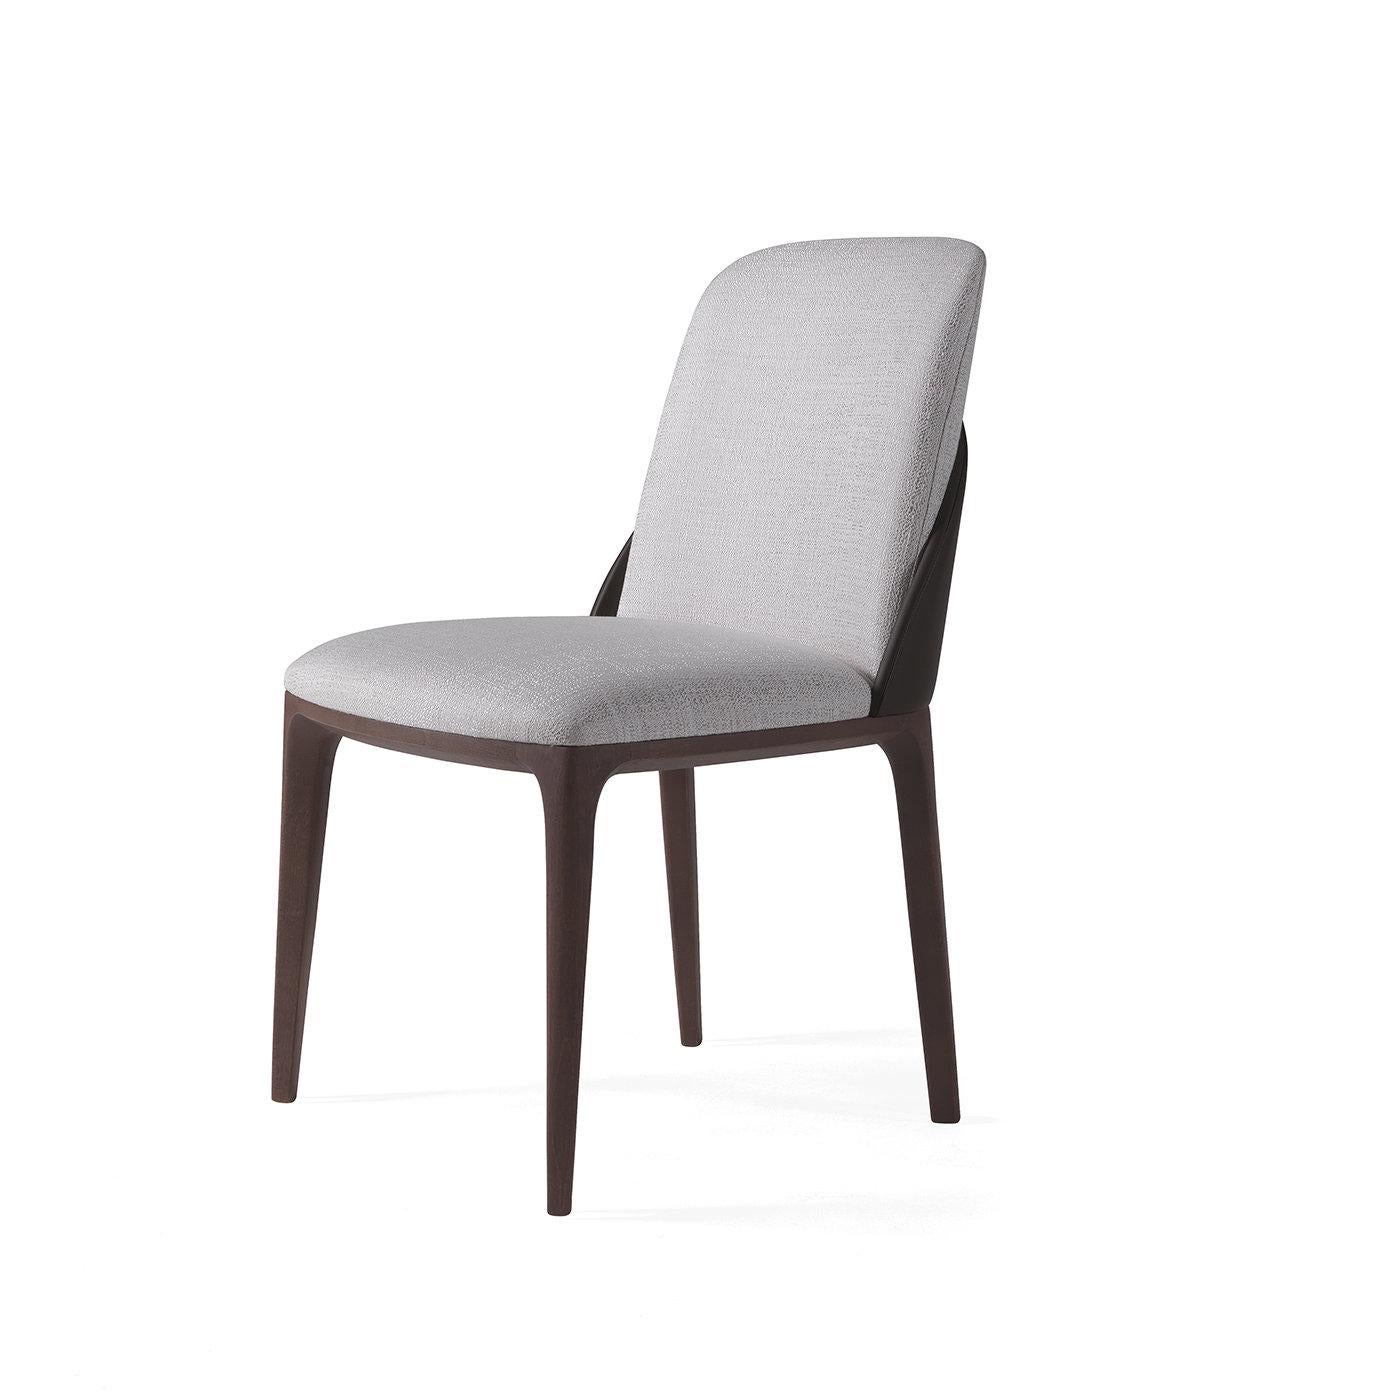 The sinuous design of the Tweet Chair will elegantly suit a modern dining room ensemble. Lightly padded and upholstered in heather-gray fabric, the seat and backrest have rounded corners that soften the sculptural silhouette, their exclusive feature